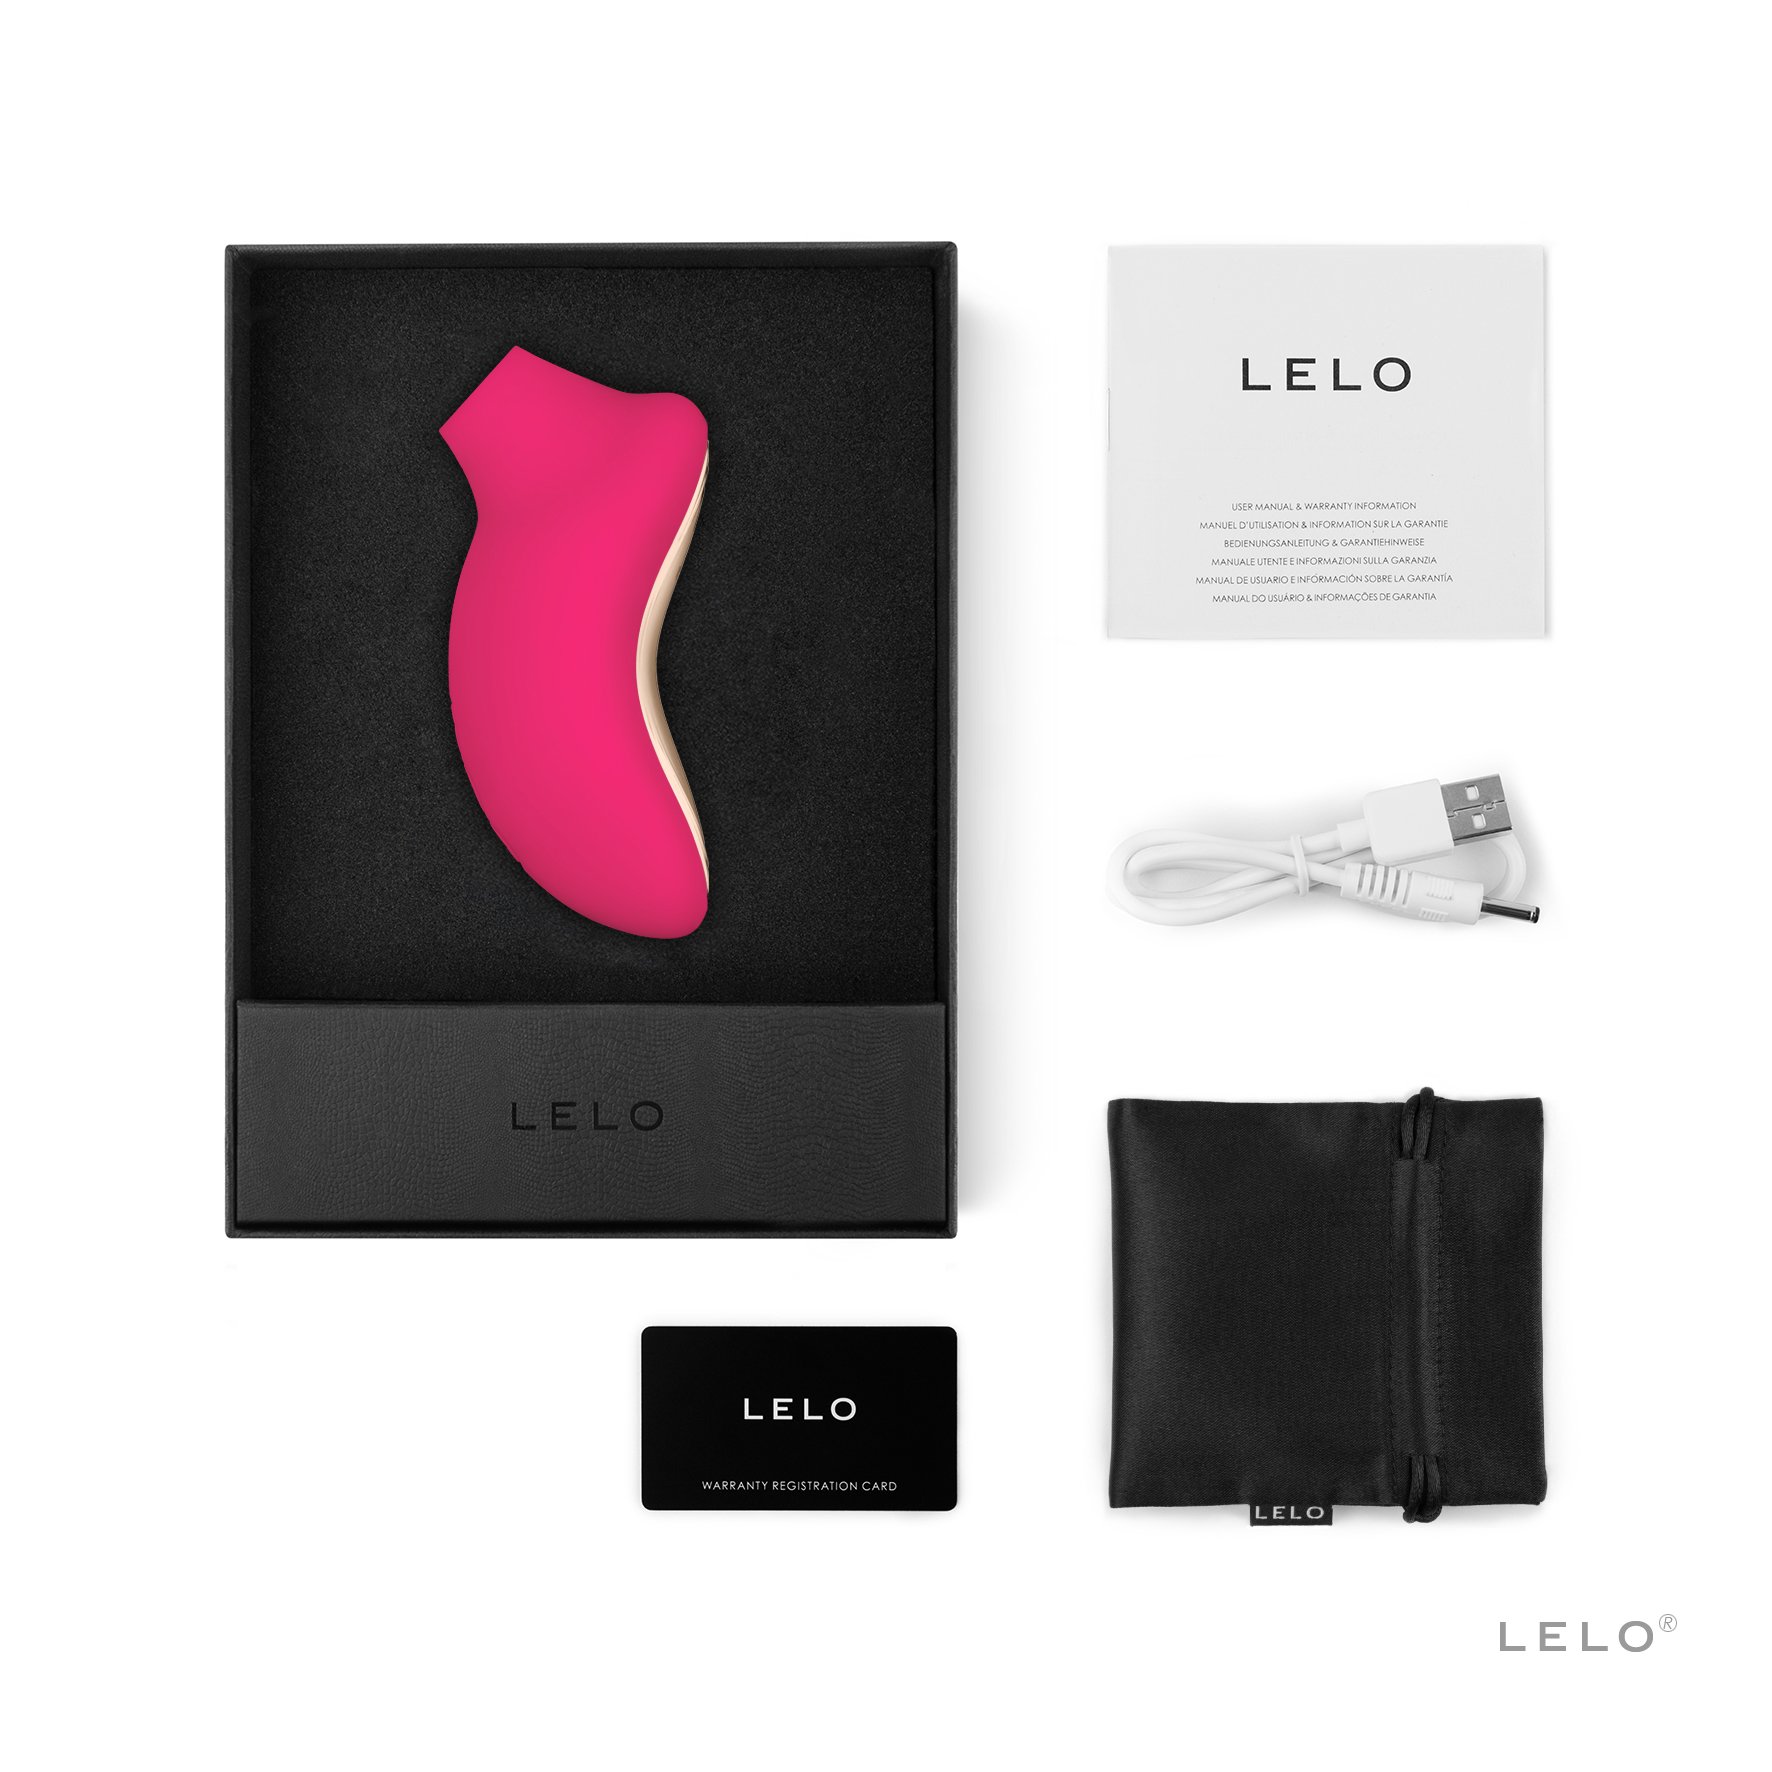 LELO SONA 2 Cruise vibrator in box with instruction manual, charging cable, storage bag, and warranty card